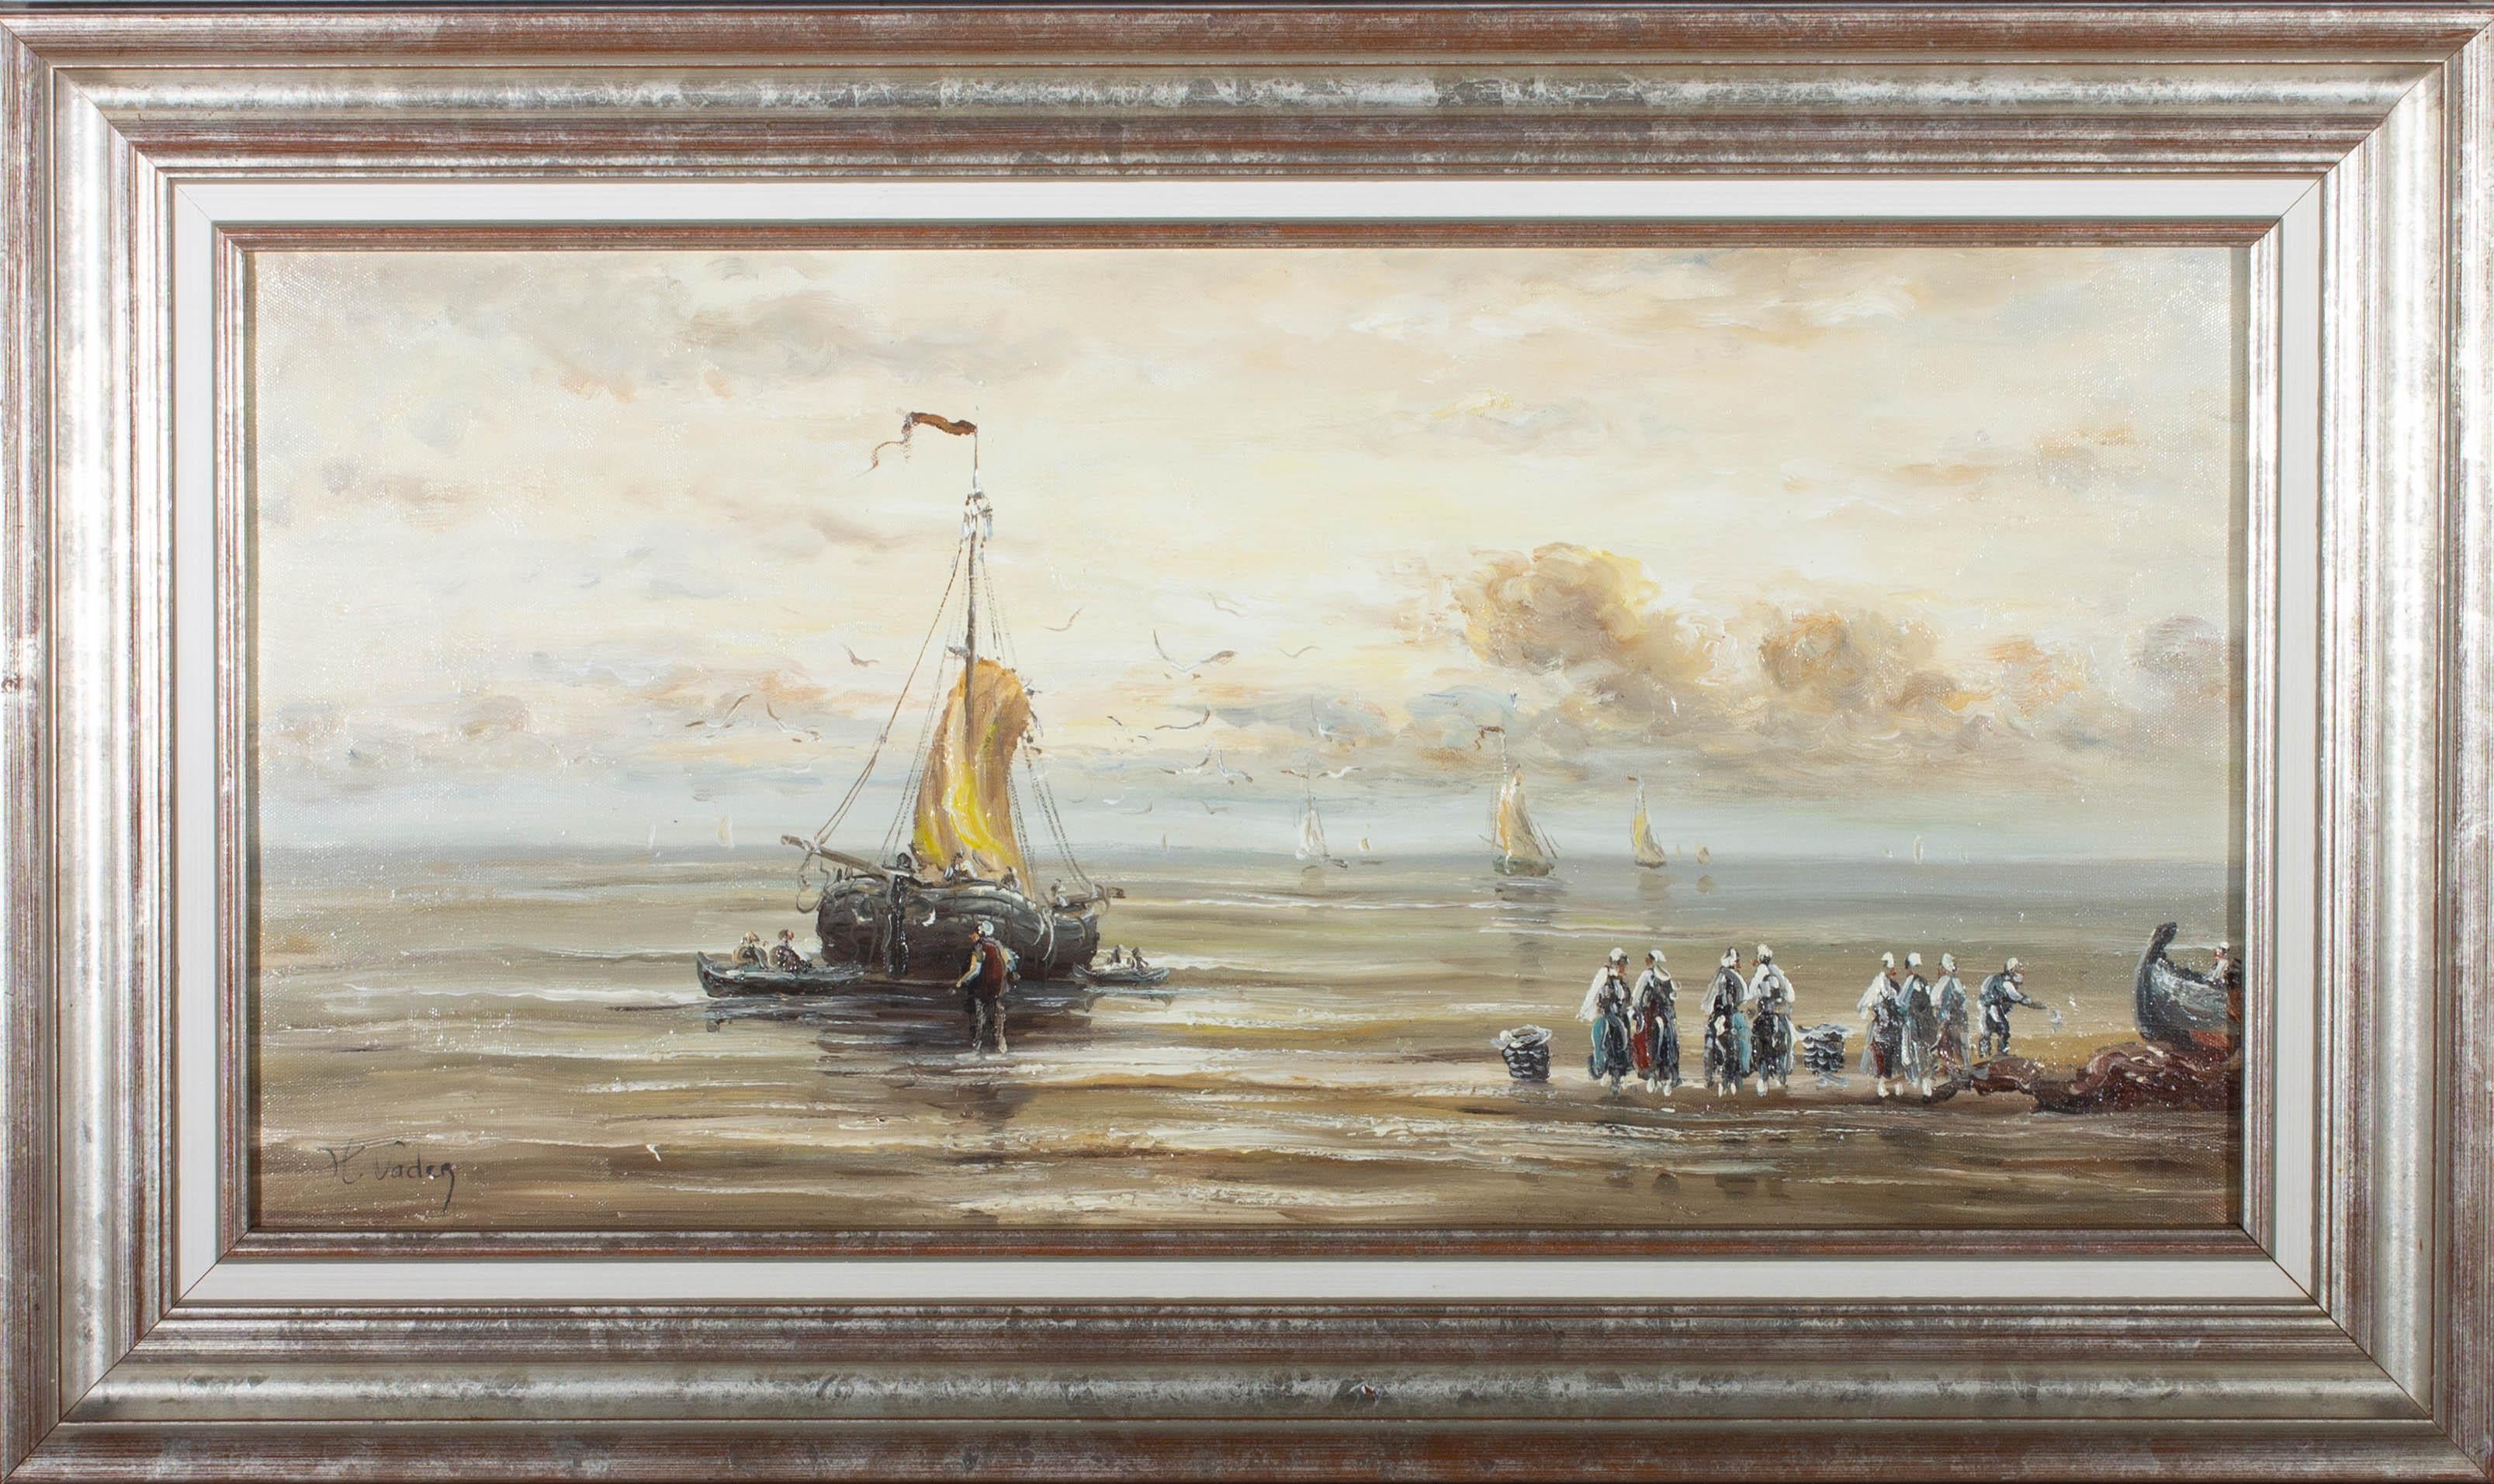 A coastal scene depicting fisherwomen waiting with their baskets to collect the catch from a boat. Presented in a distressed silver gilt-effect wooden frame. Signed to the lower-left edge. There is a Racine Art Gallery, Paris, France, certificate of